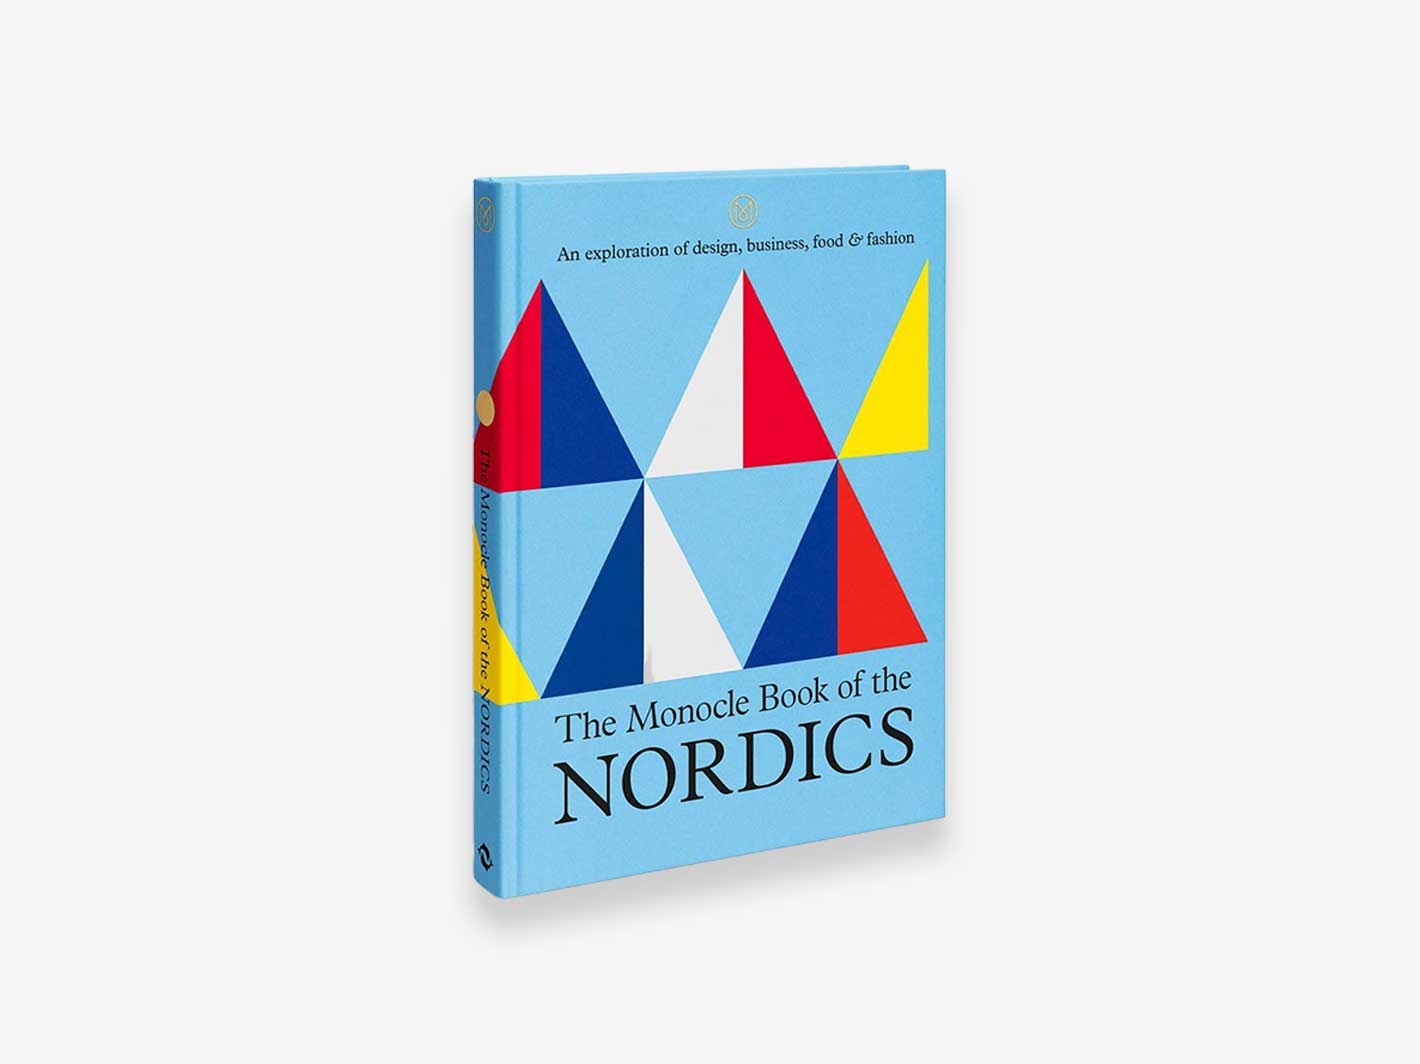 The Monocle Book of The Nordics